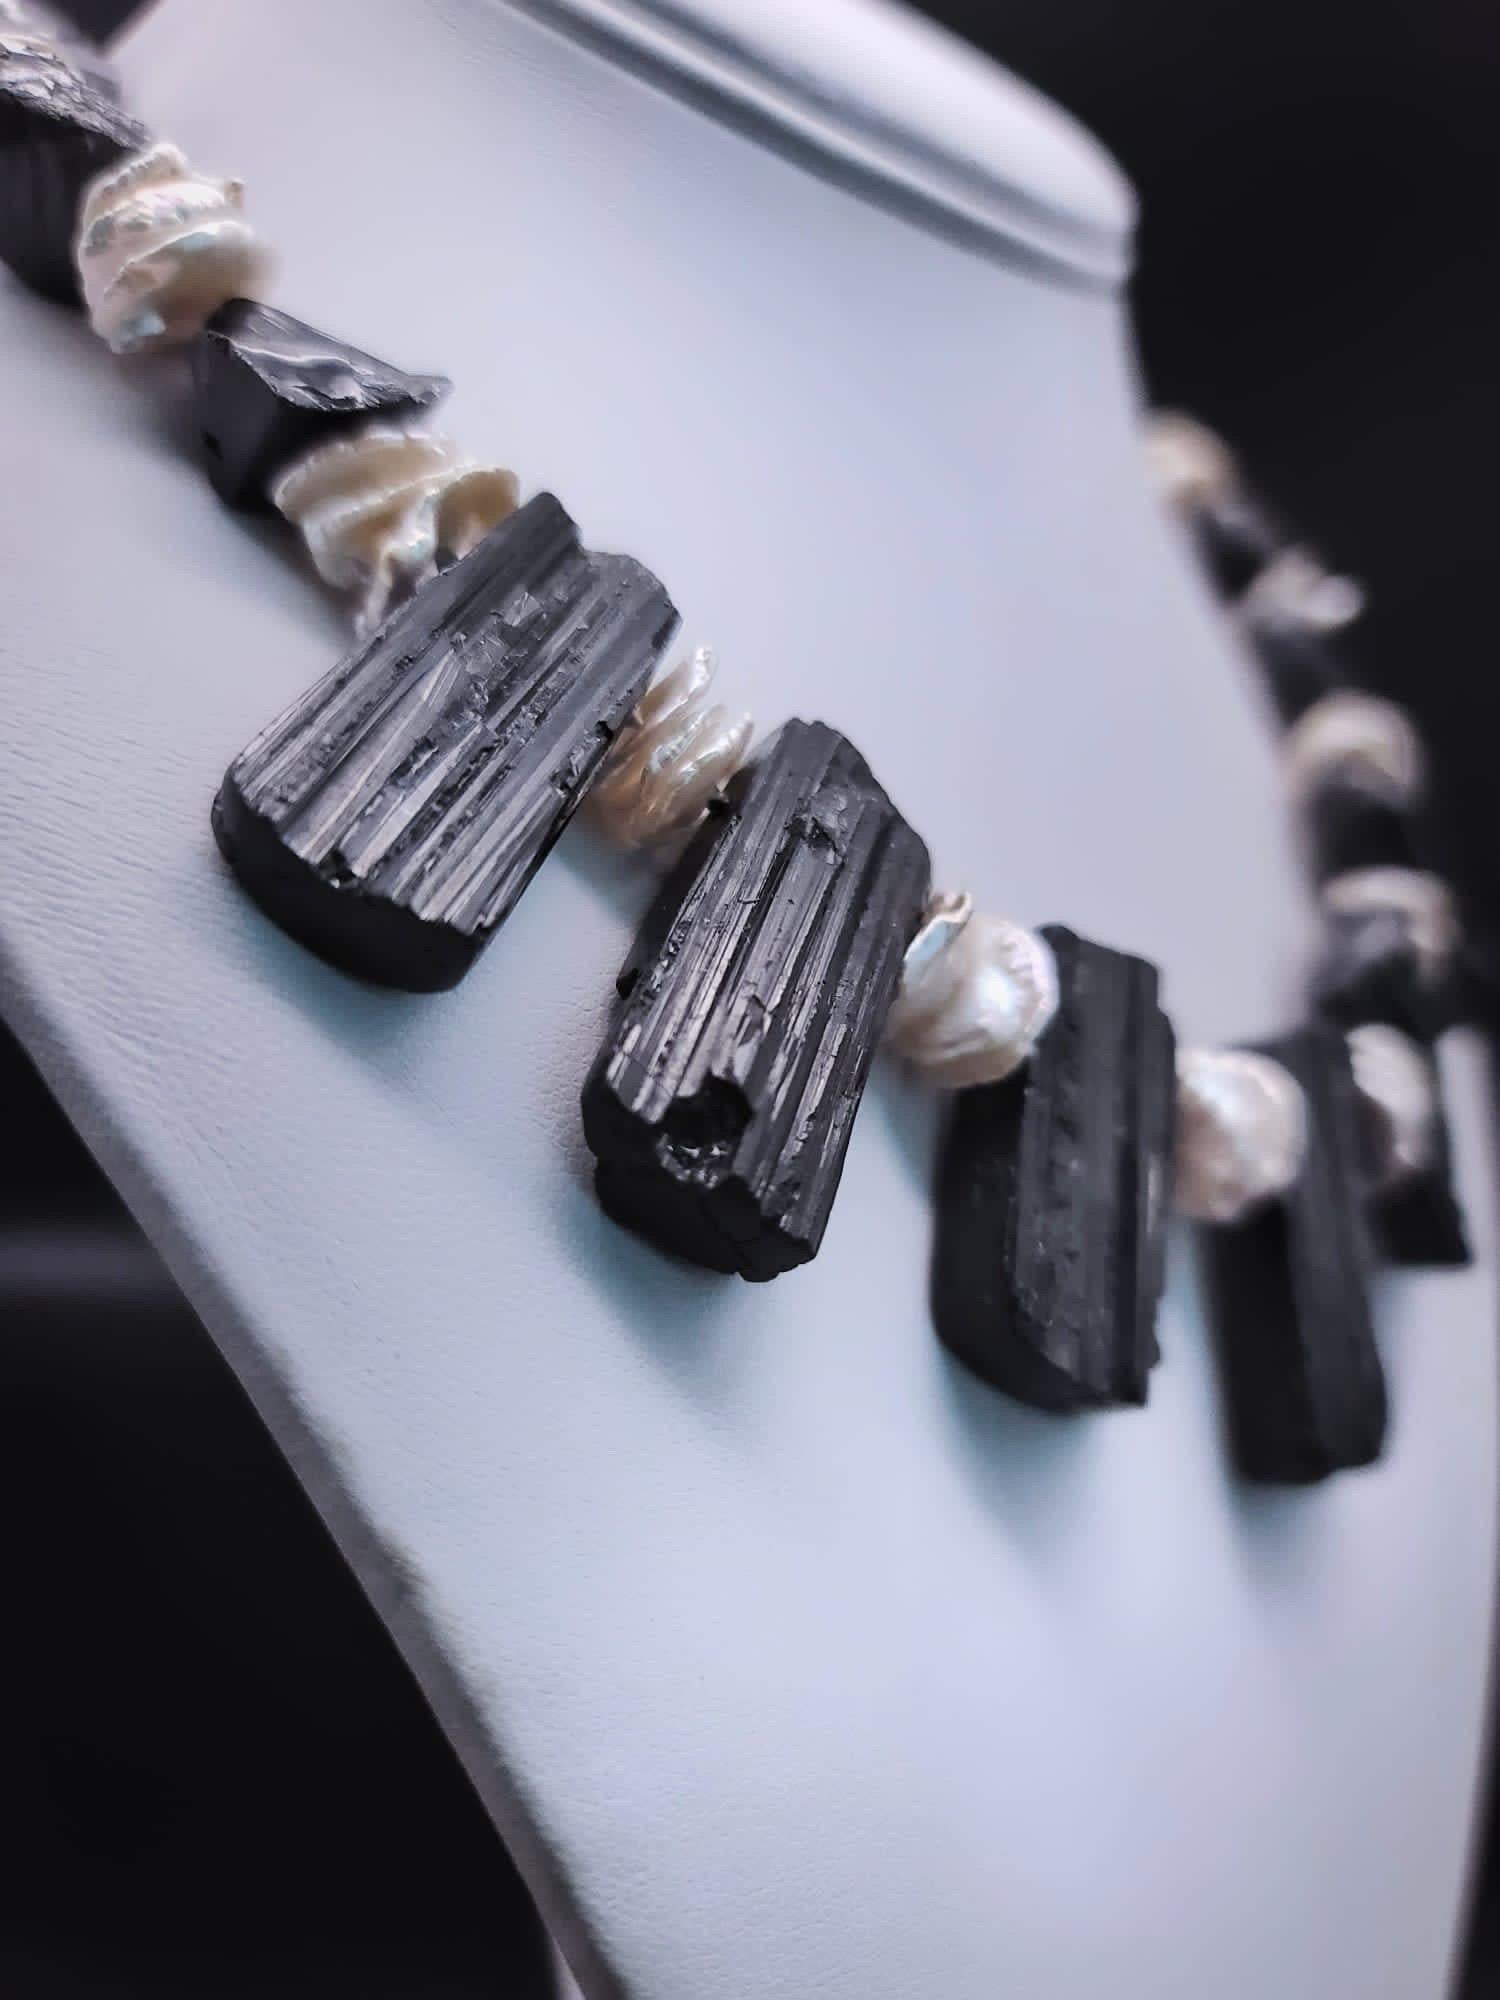 One-of-a-Kind

Indulge in the allure of black and white with this exquisite Black Tourmaline and white pearl necklace. Large nuggets of rough-cut and polished Black Tourmaline are seamlessly mixed with center-drilled ruffled Keshi pearls, creating a